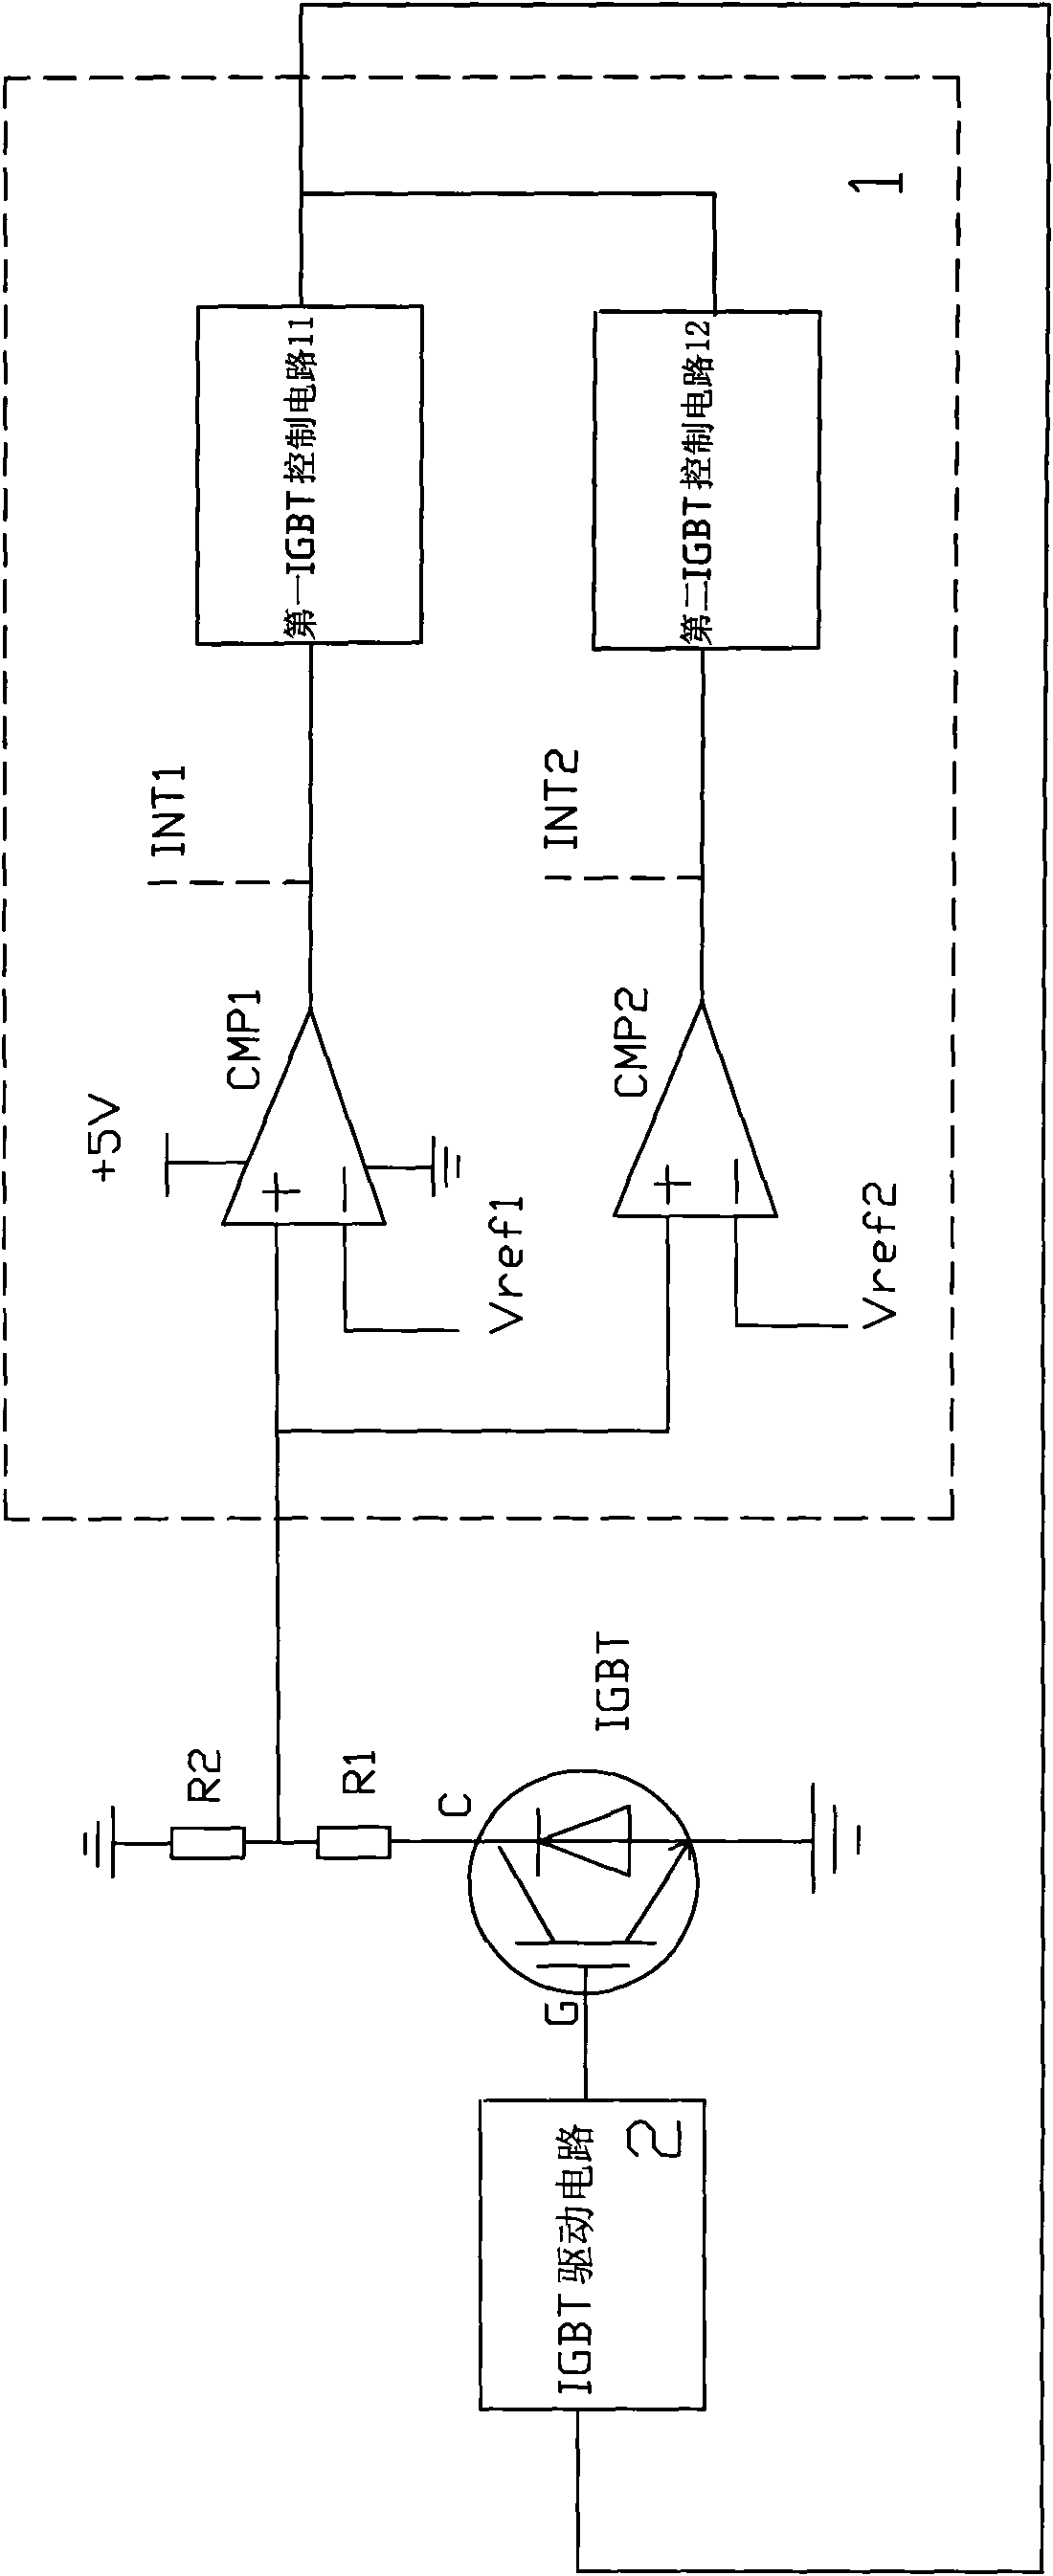 Monitoring method of IGBT collector overvoltage double protection